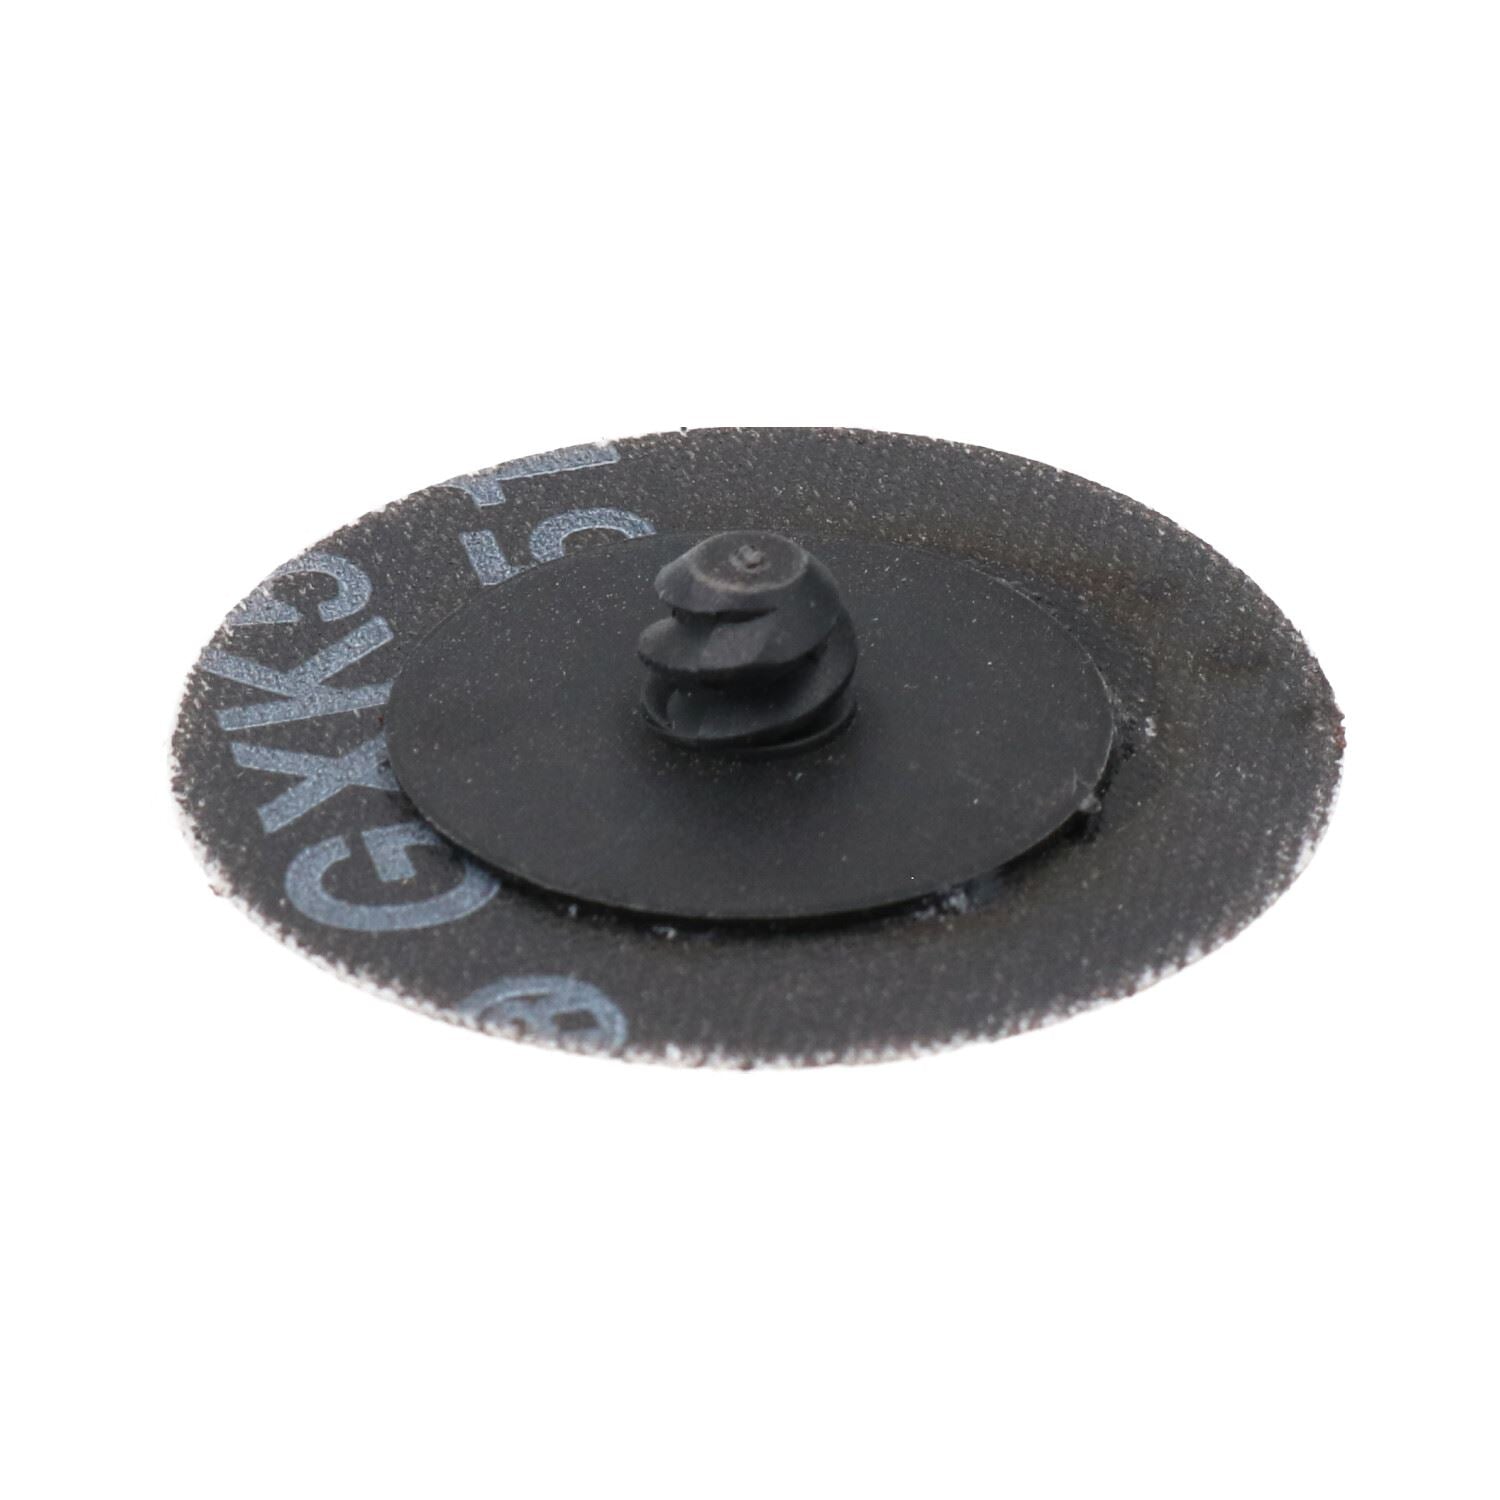 240 Grit 50mm Fine Quick Change Sanding Discs Rust Removal Deburring 100pc